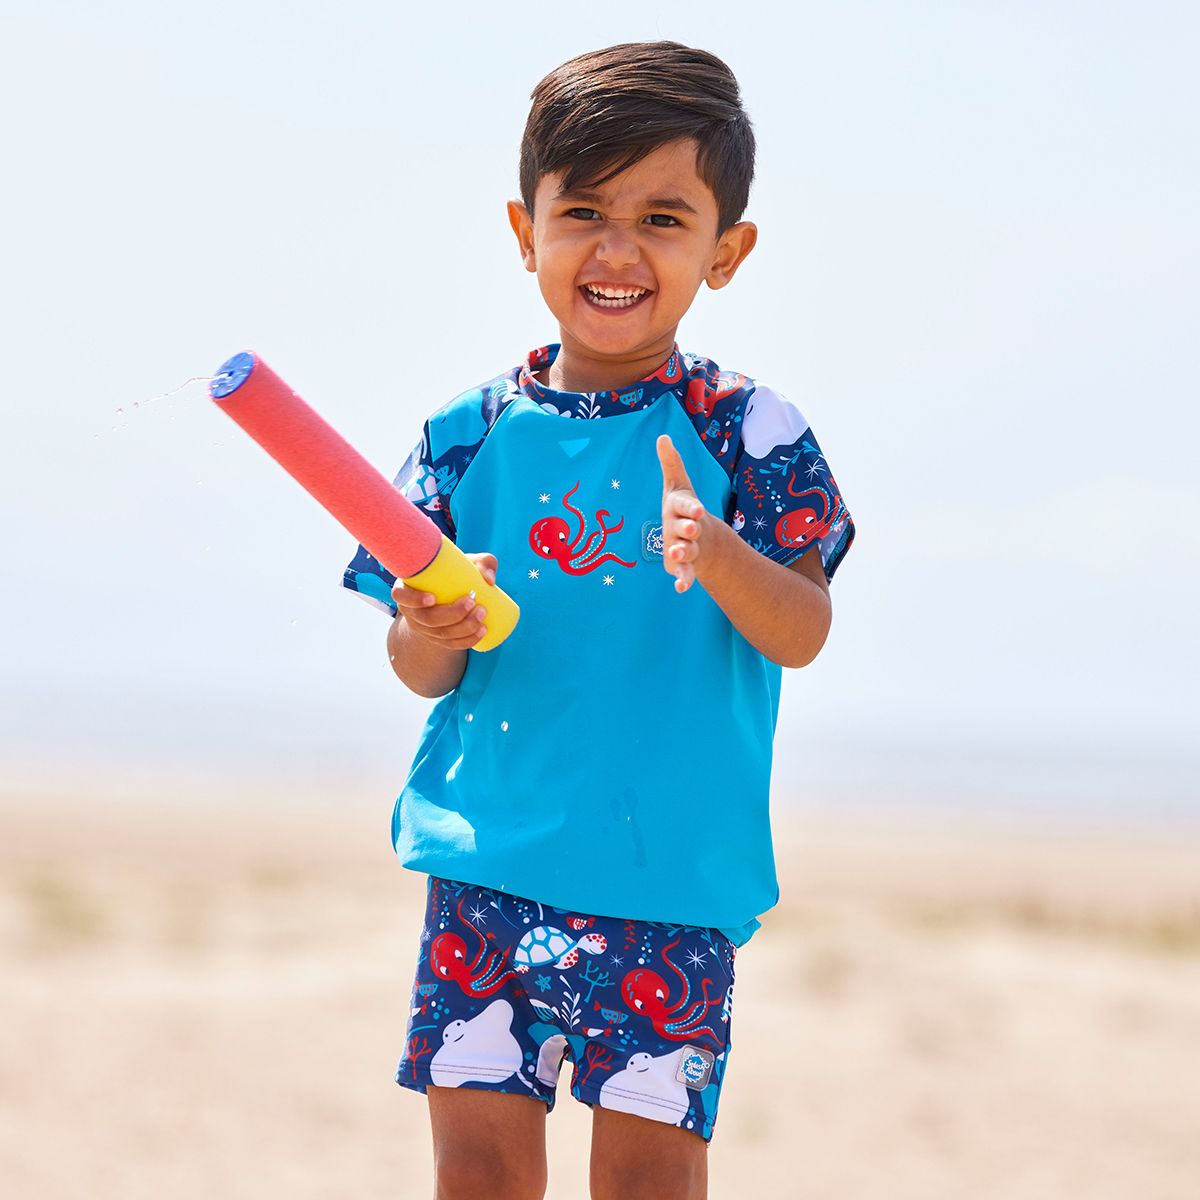 Lifestyle image of toddler wearing UV protective short sleeve rash top in blue, and under the sea themed print on the chest and sleeves. He's also wearing matching jammers or swim shorts.